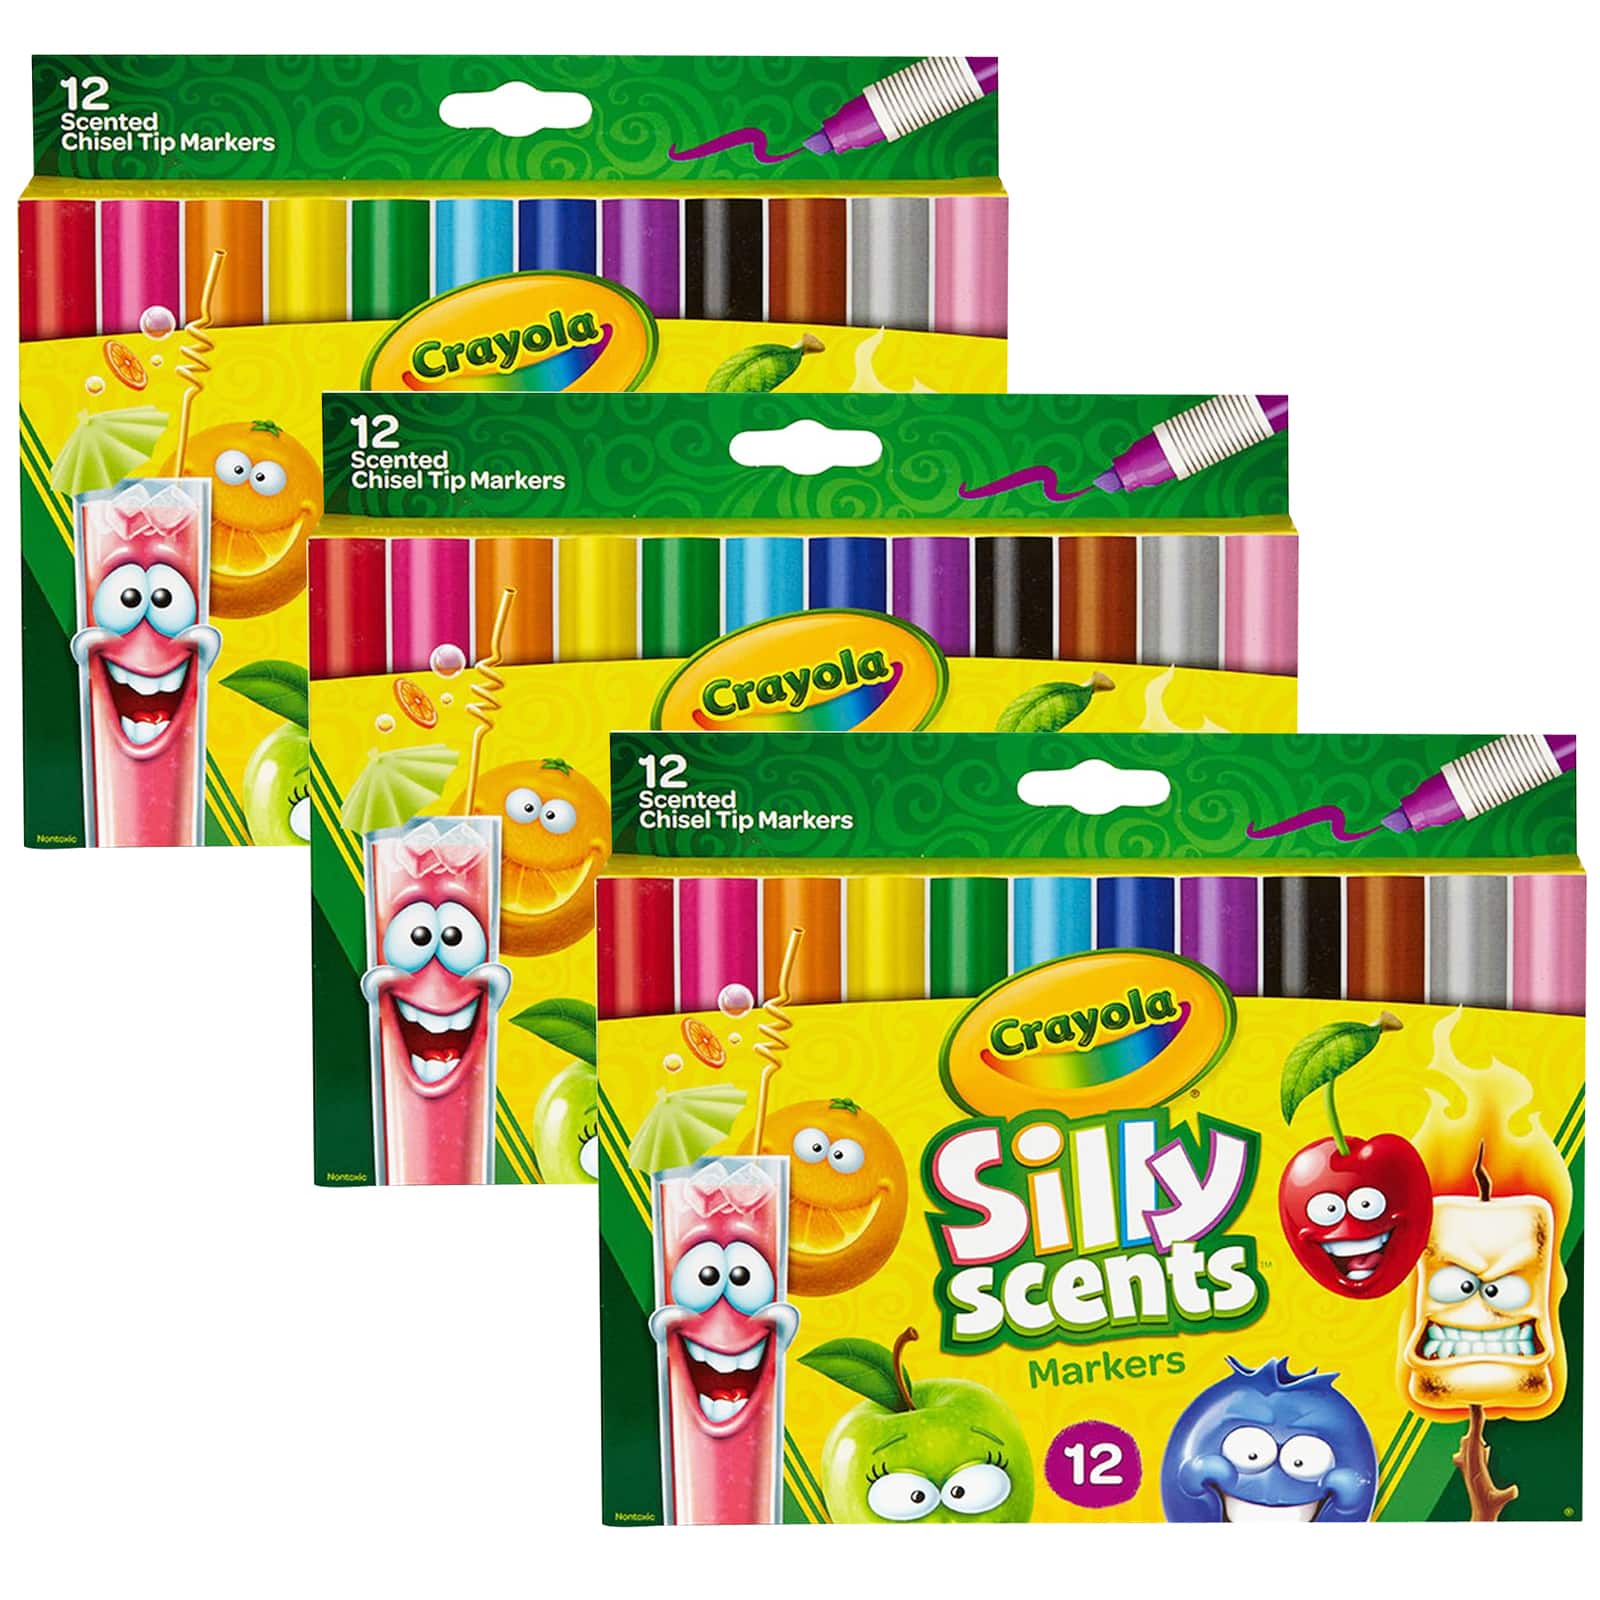 Crayola Art With Edge Washable Thick & Thin Markers - 20 count